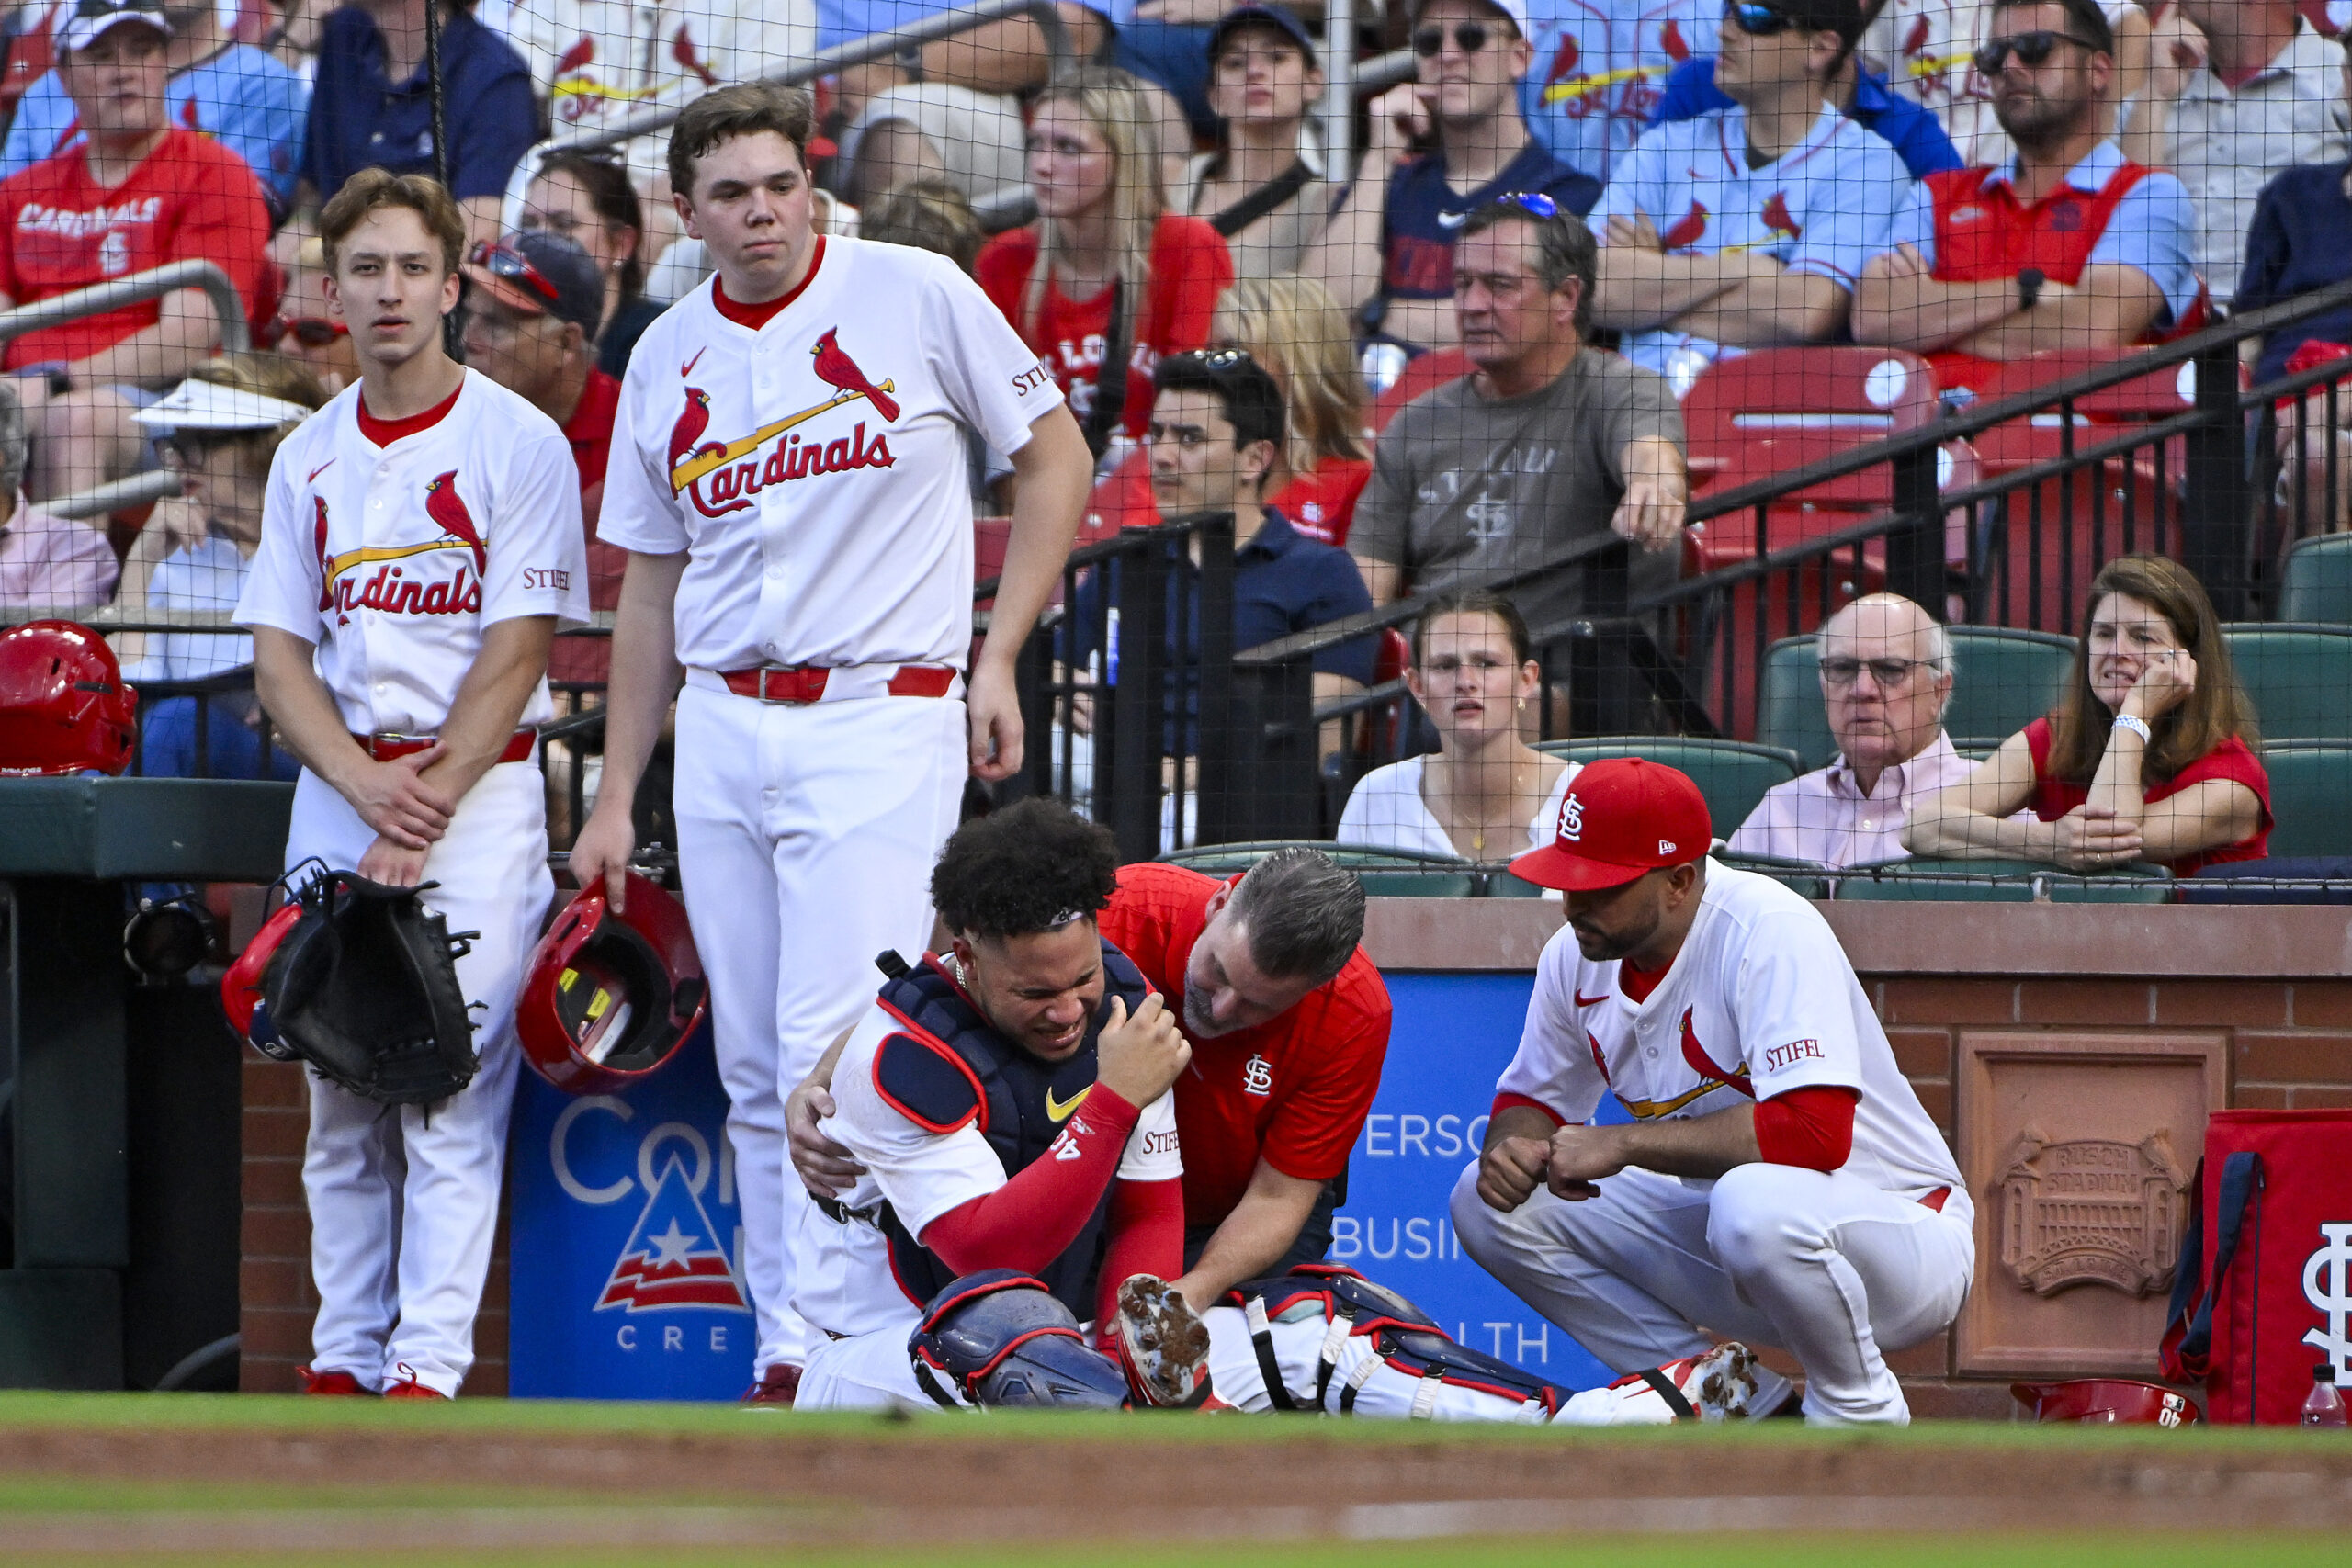 Cardinals To Be Without Most Consistent Hitter After Bat Breaks His Arm